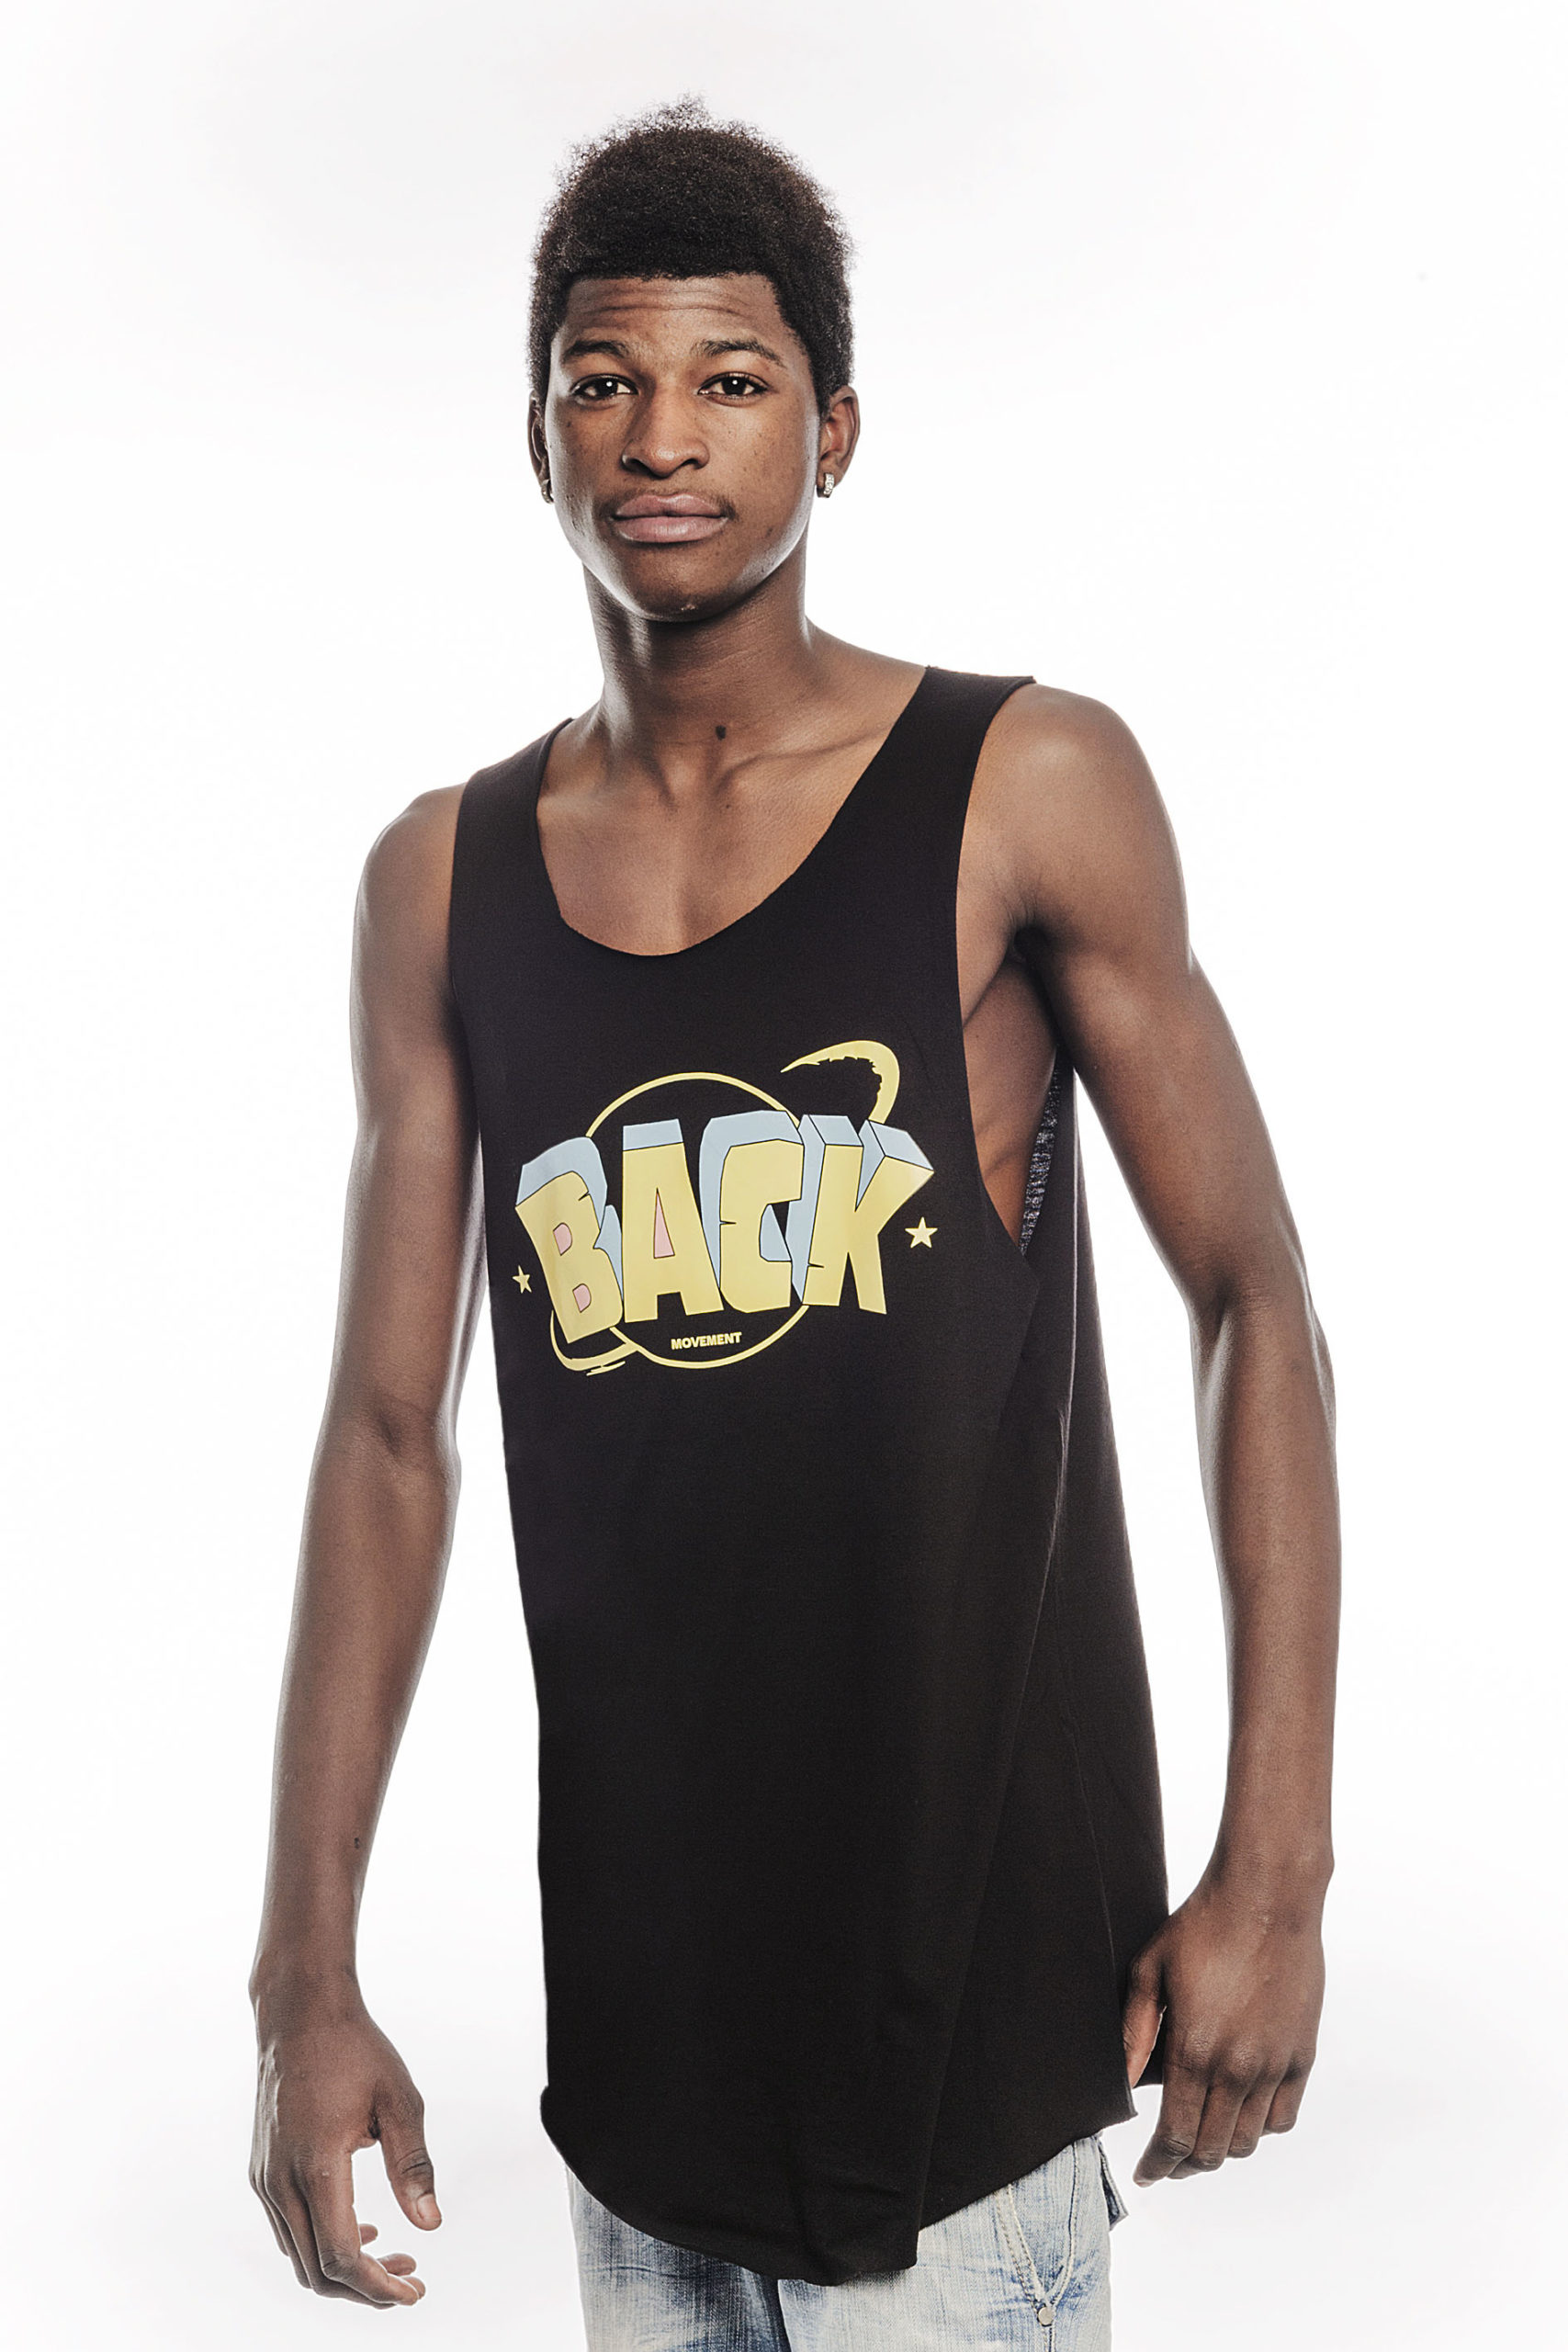 BACK AND YELLOW TANK HEY! BACK! SUMMER17 COLLECTION MAN